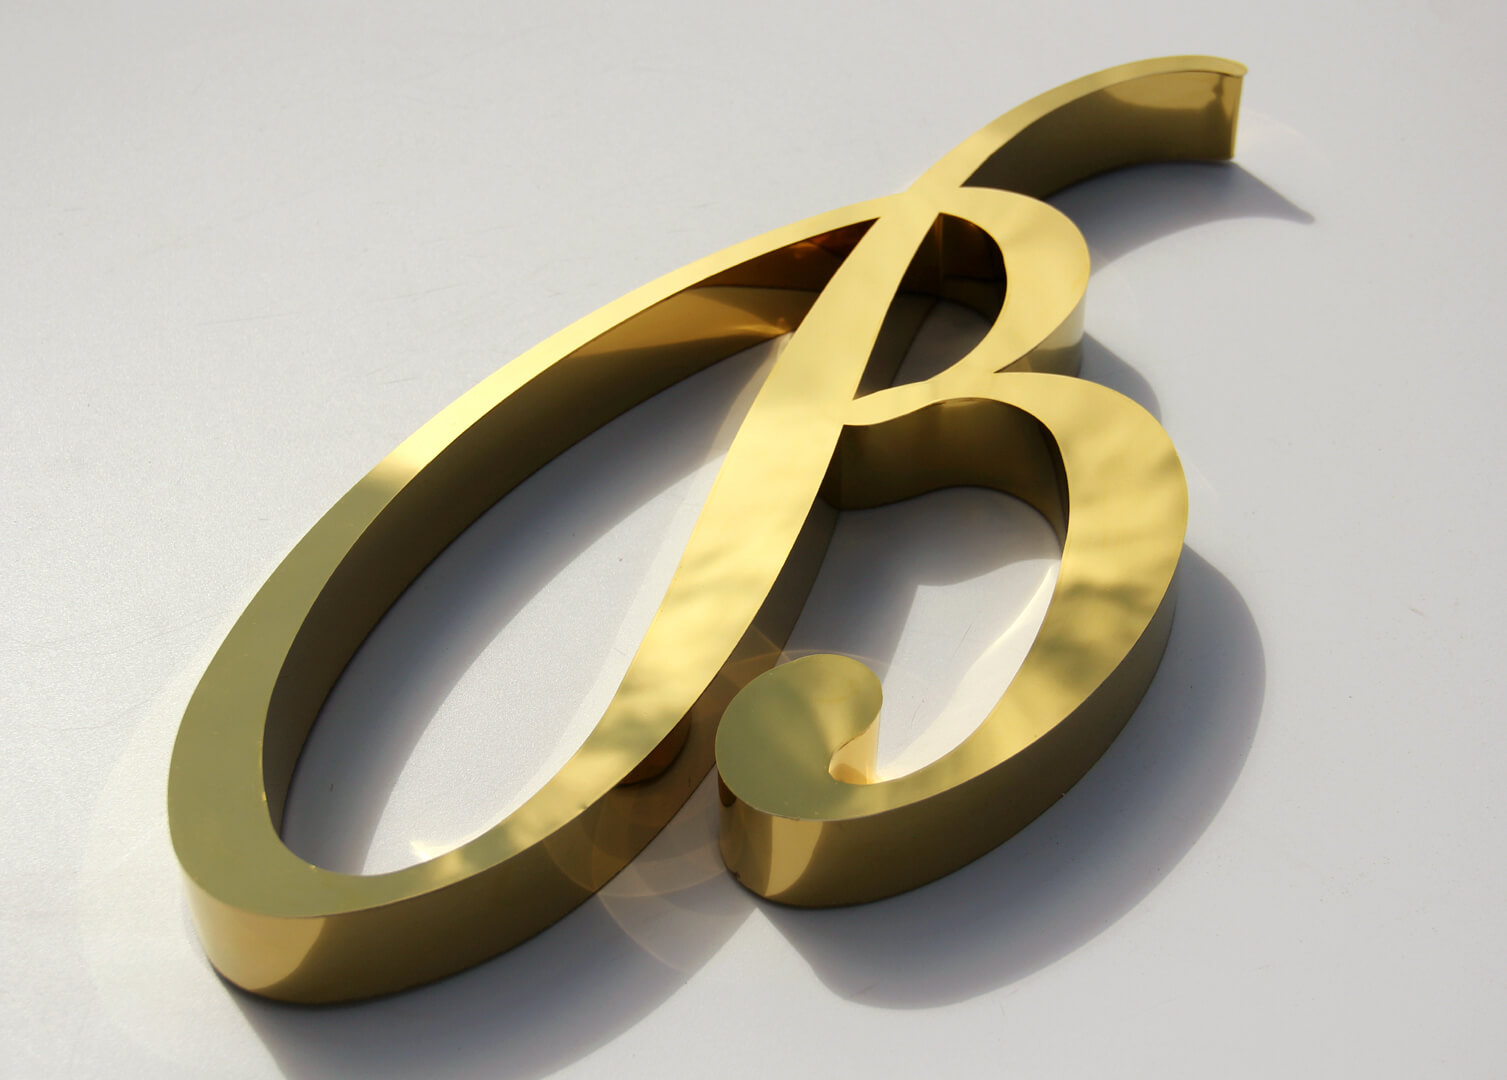 Letters B in gold - Gold letter B made of stainless steel.